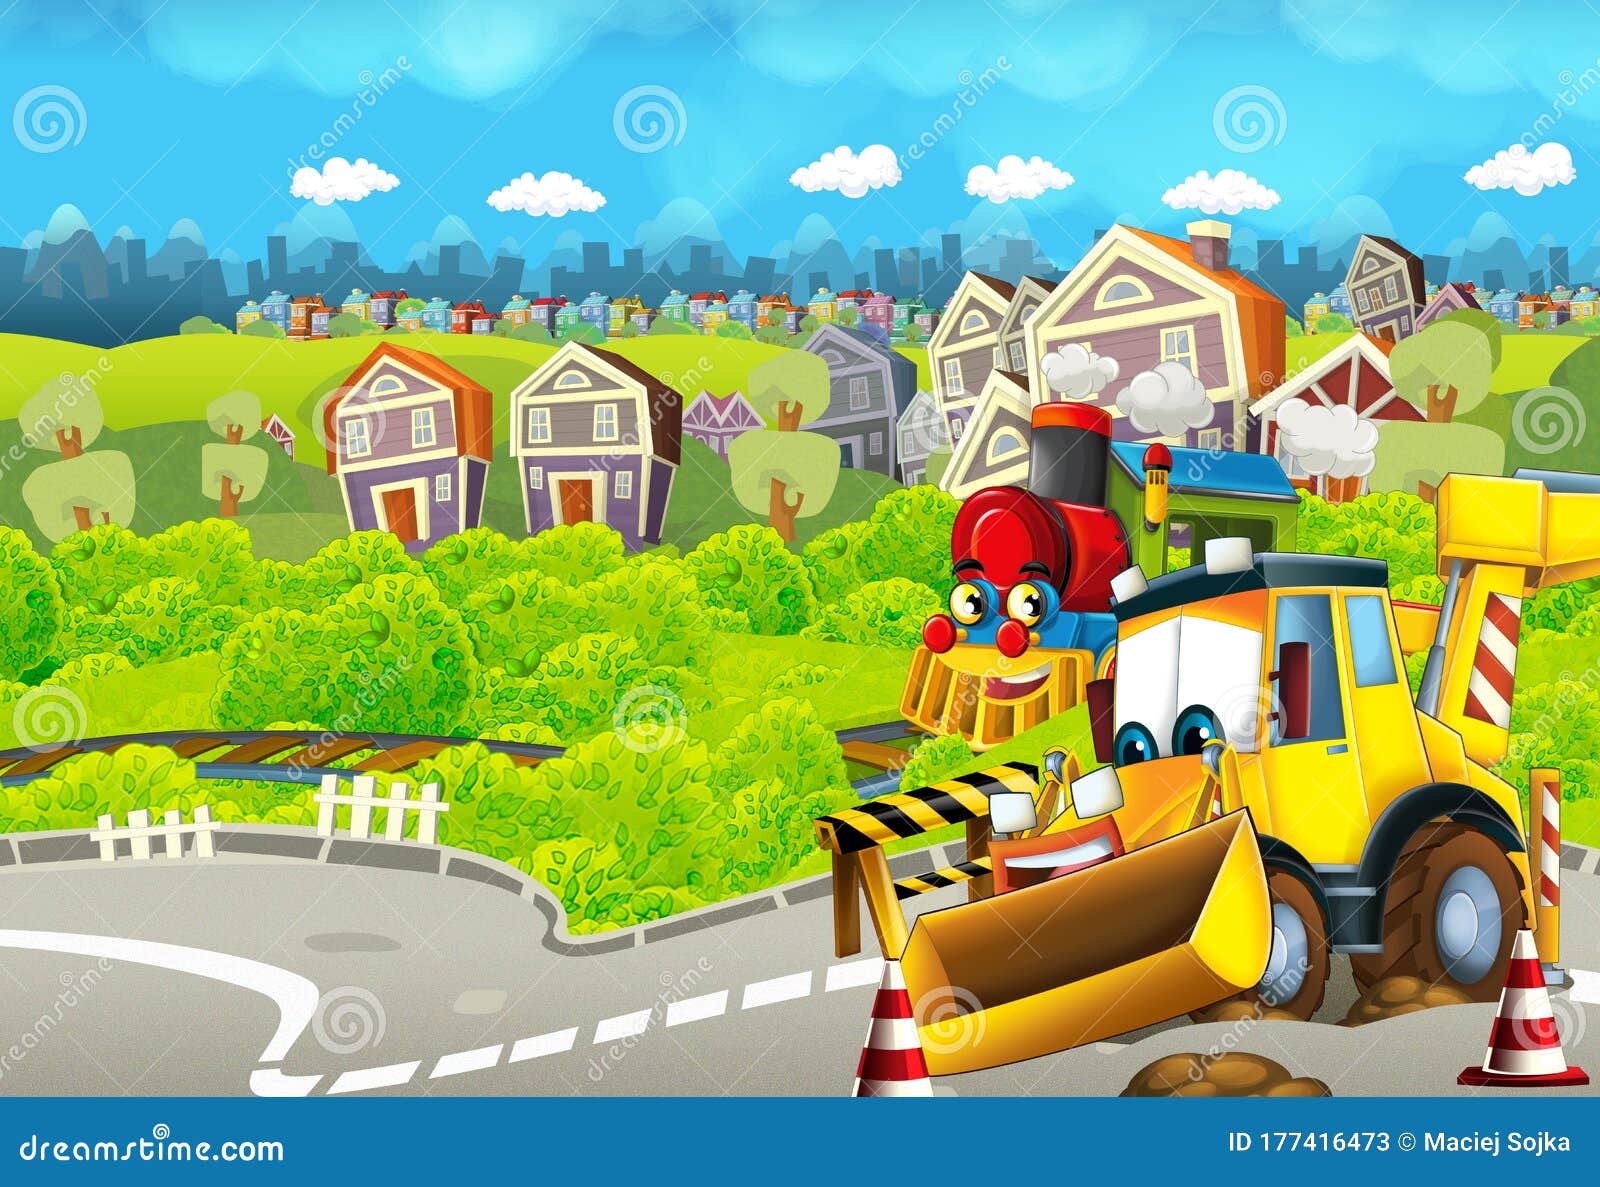 Cartoon Funny Looking Train on the Train Station Near the City and  Excavator Digger Car Driving and Plane Flying - Illustration Stock Image -  Image of playful, children: 177416473